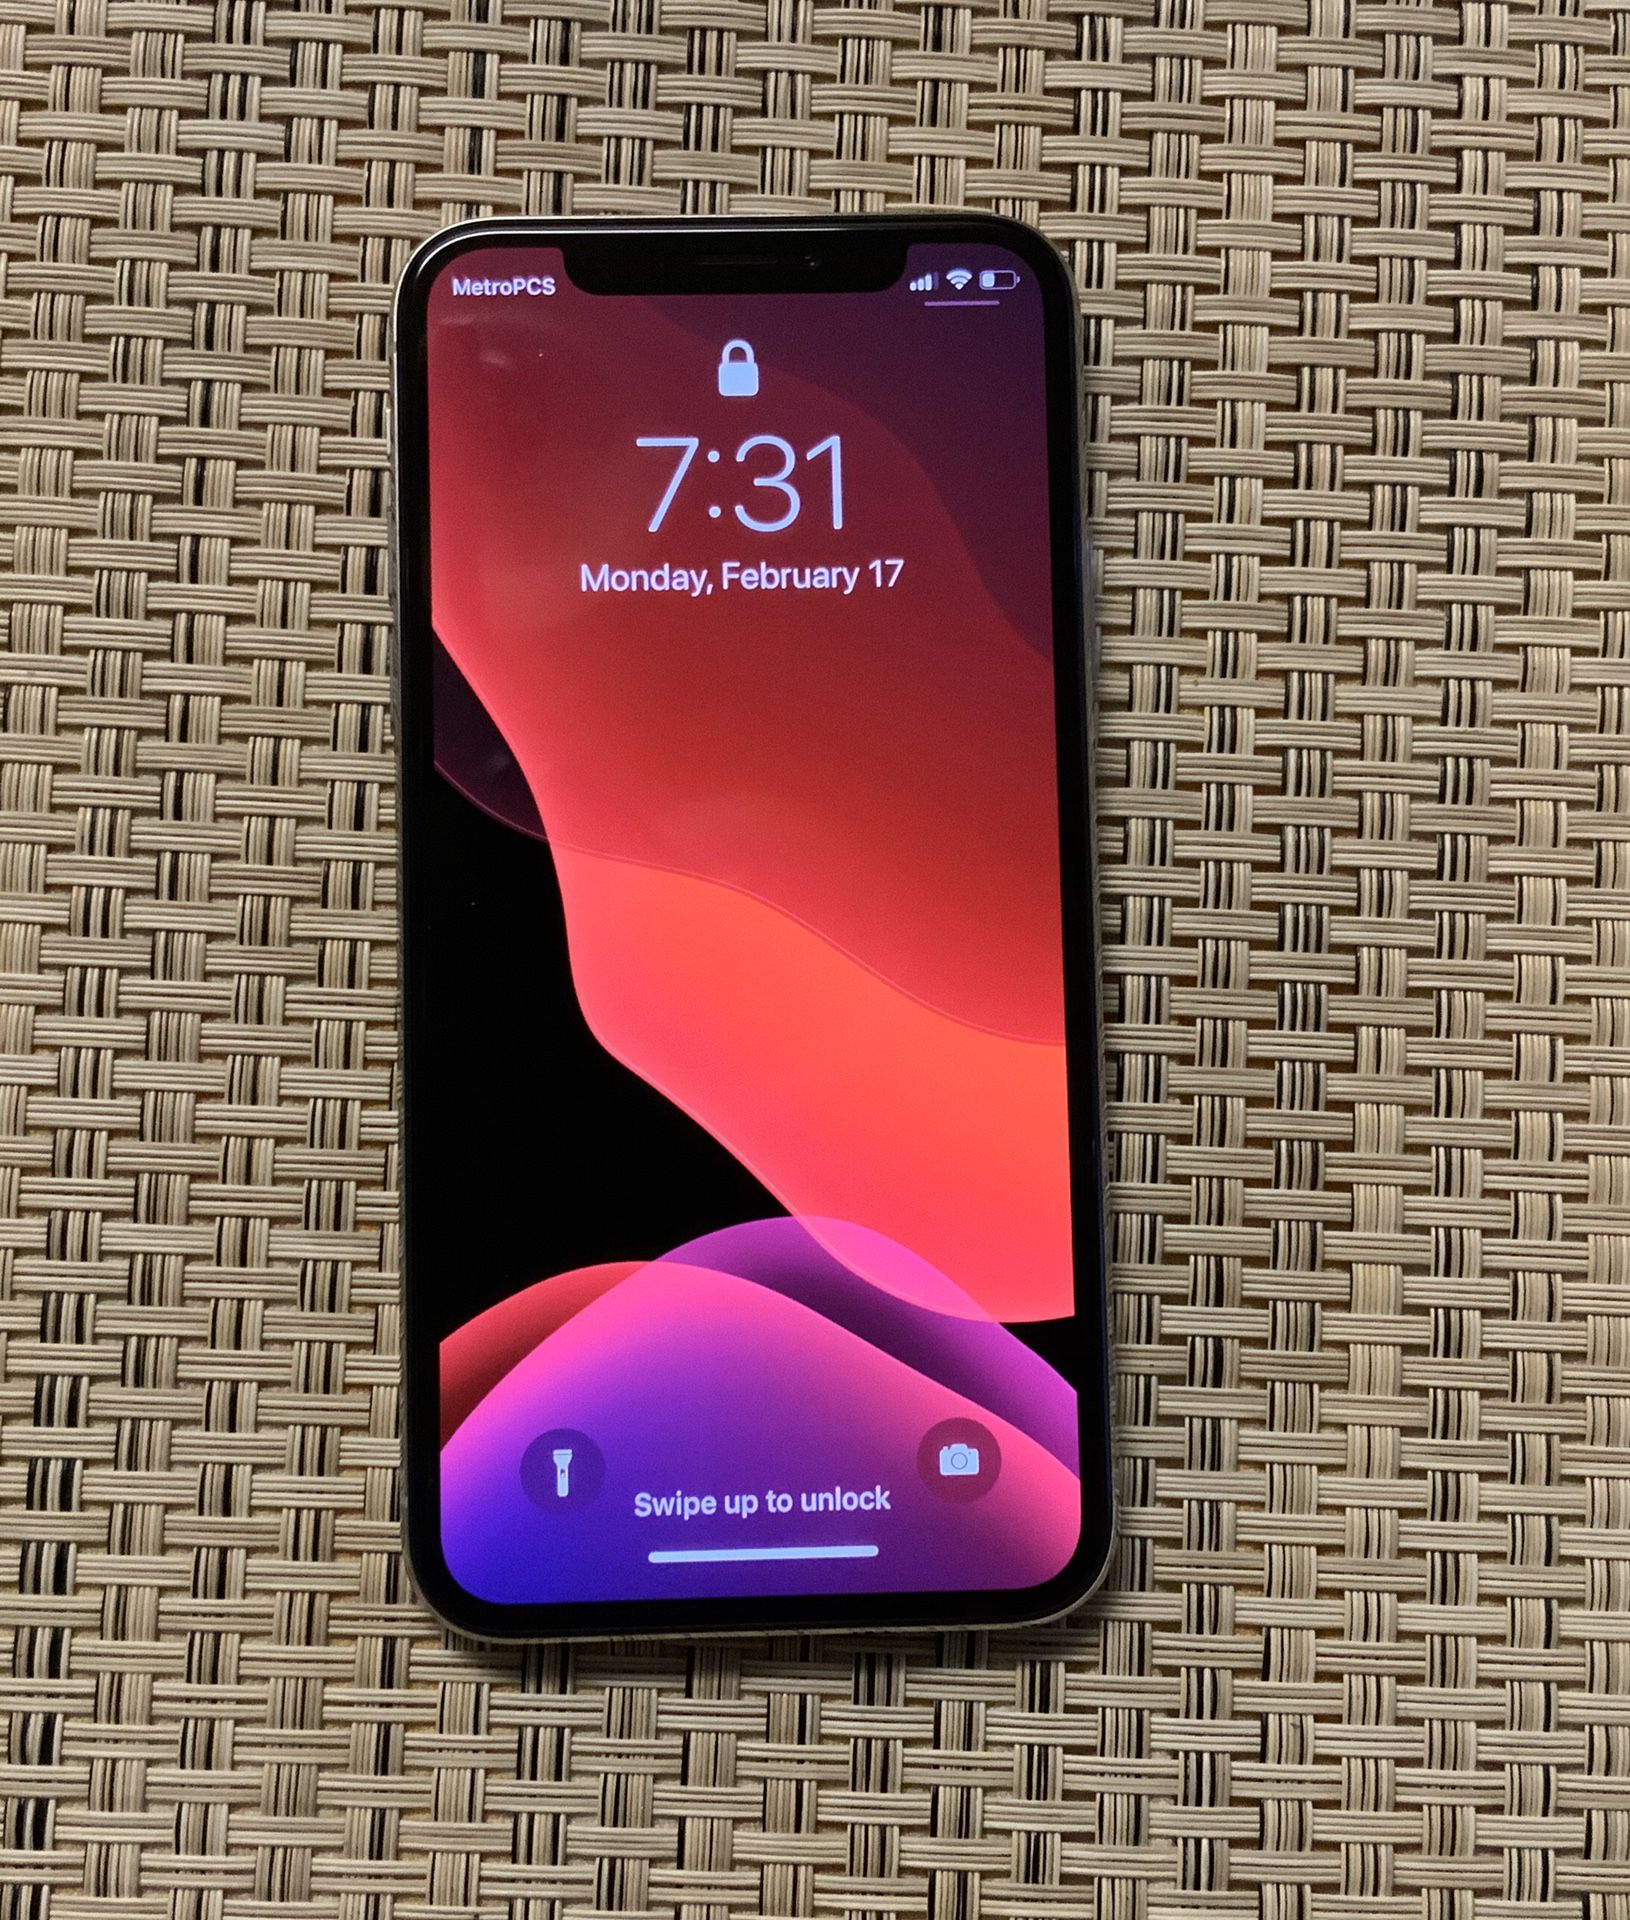 iPhone X unlocked with Apple care